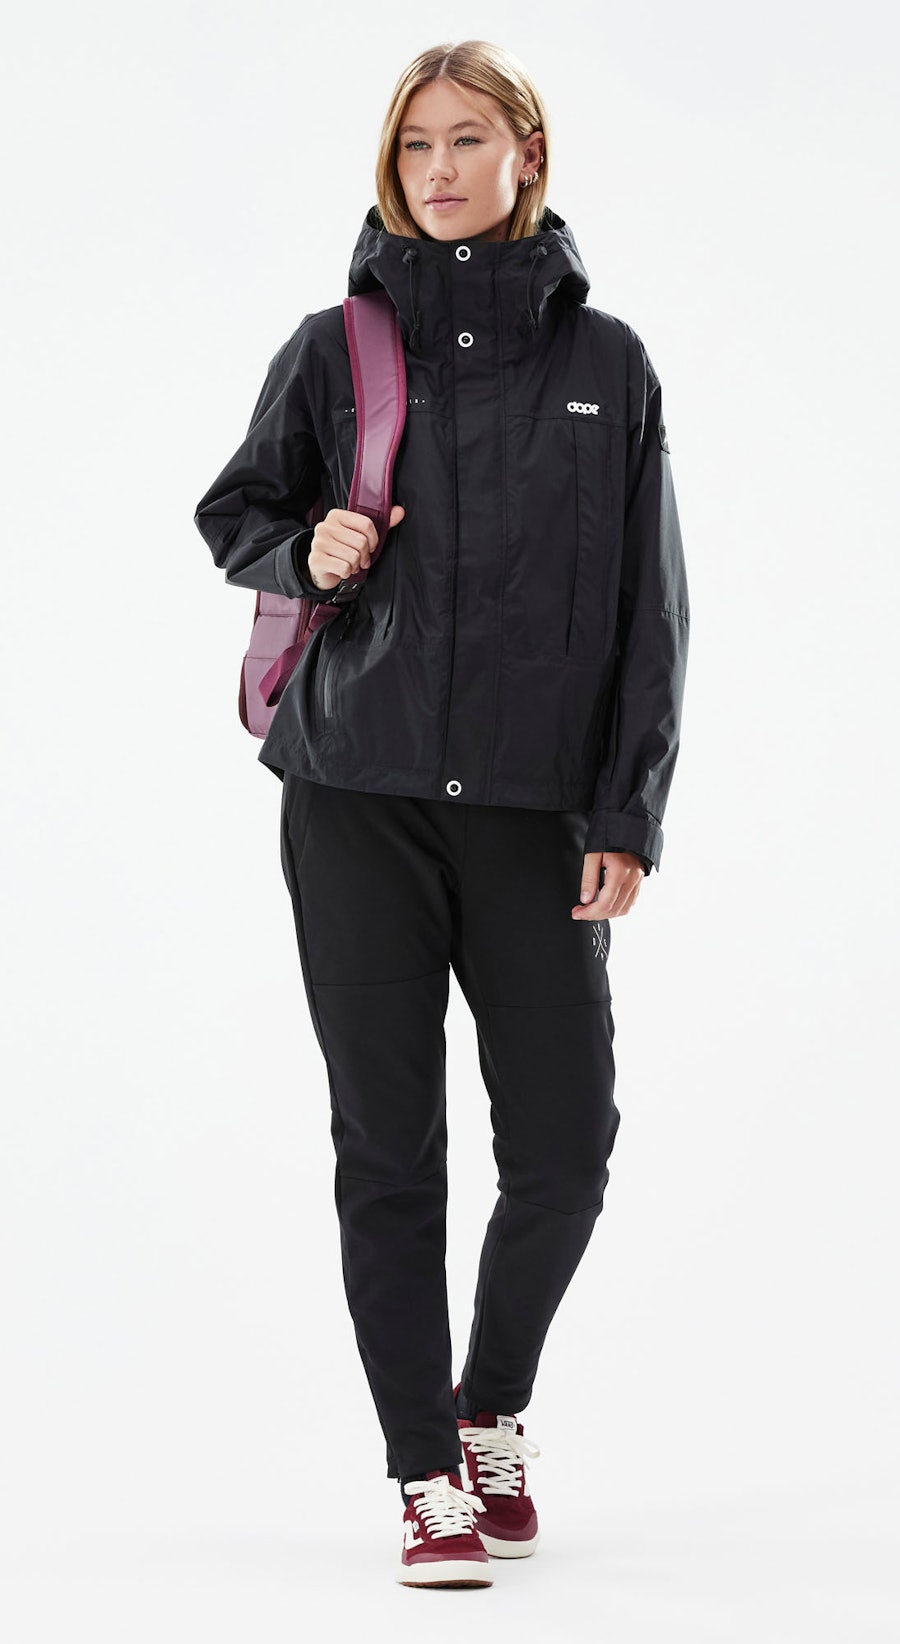 Ranger Light W Outfit Outdoor Donna Black